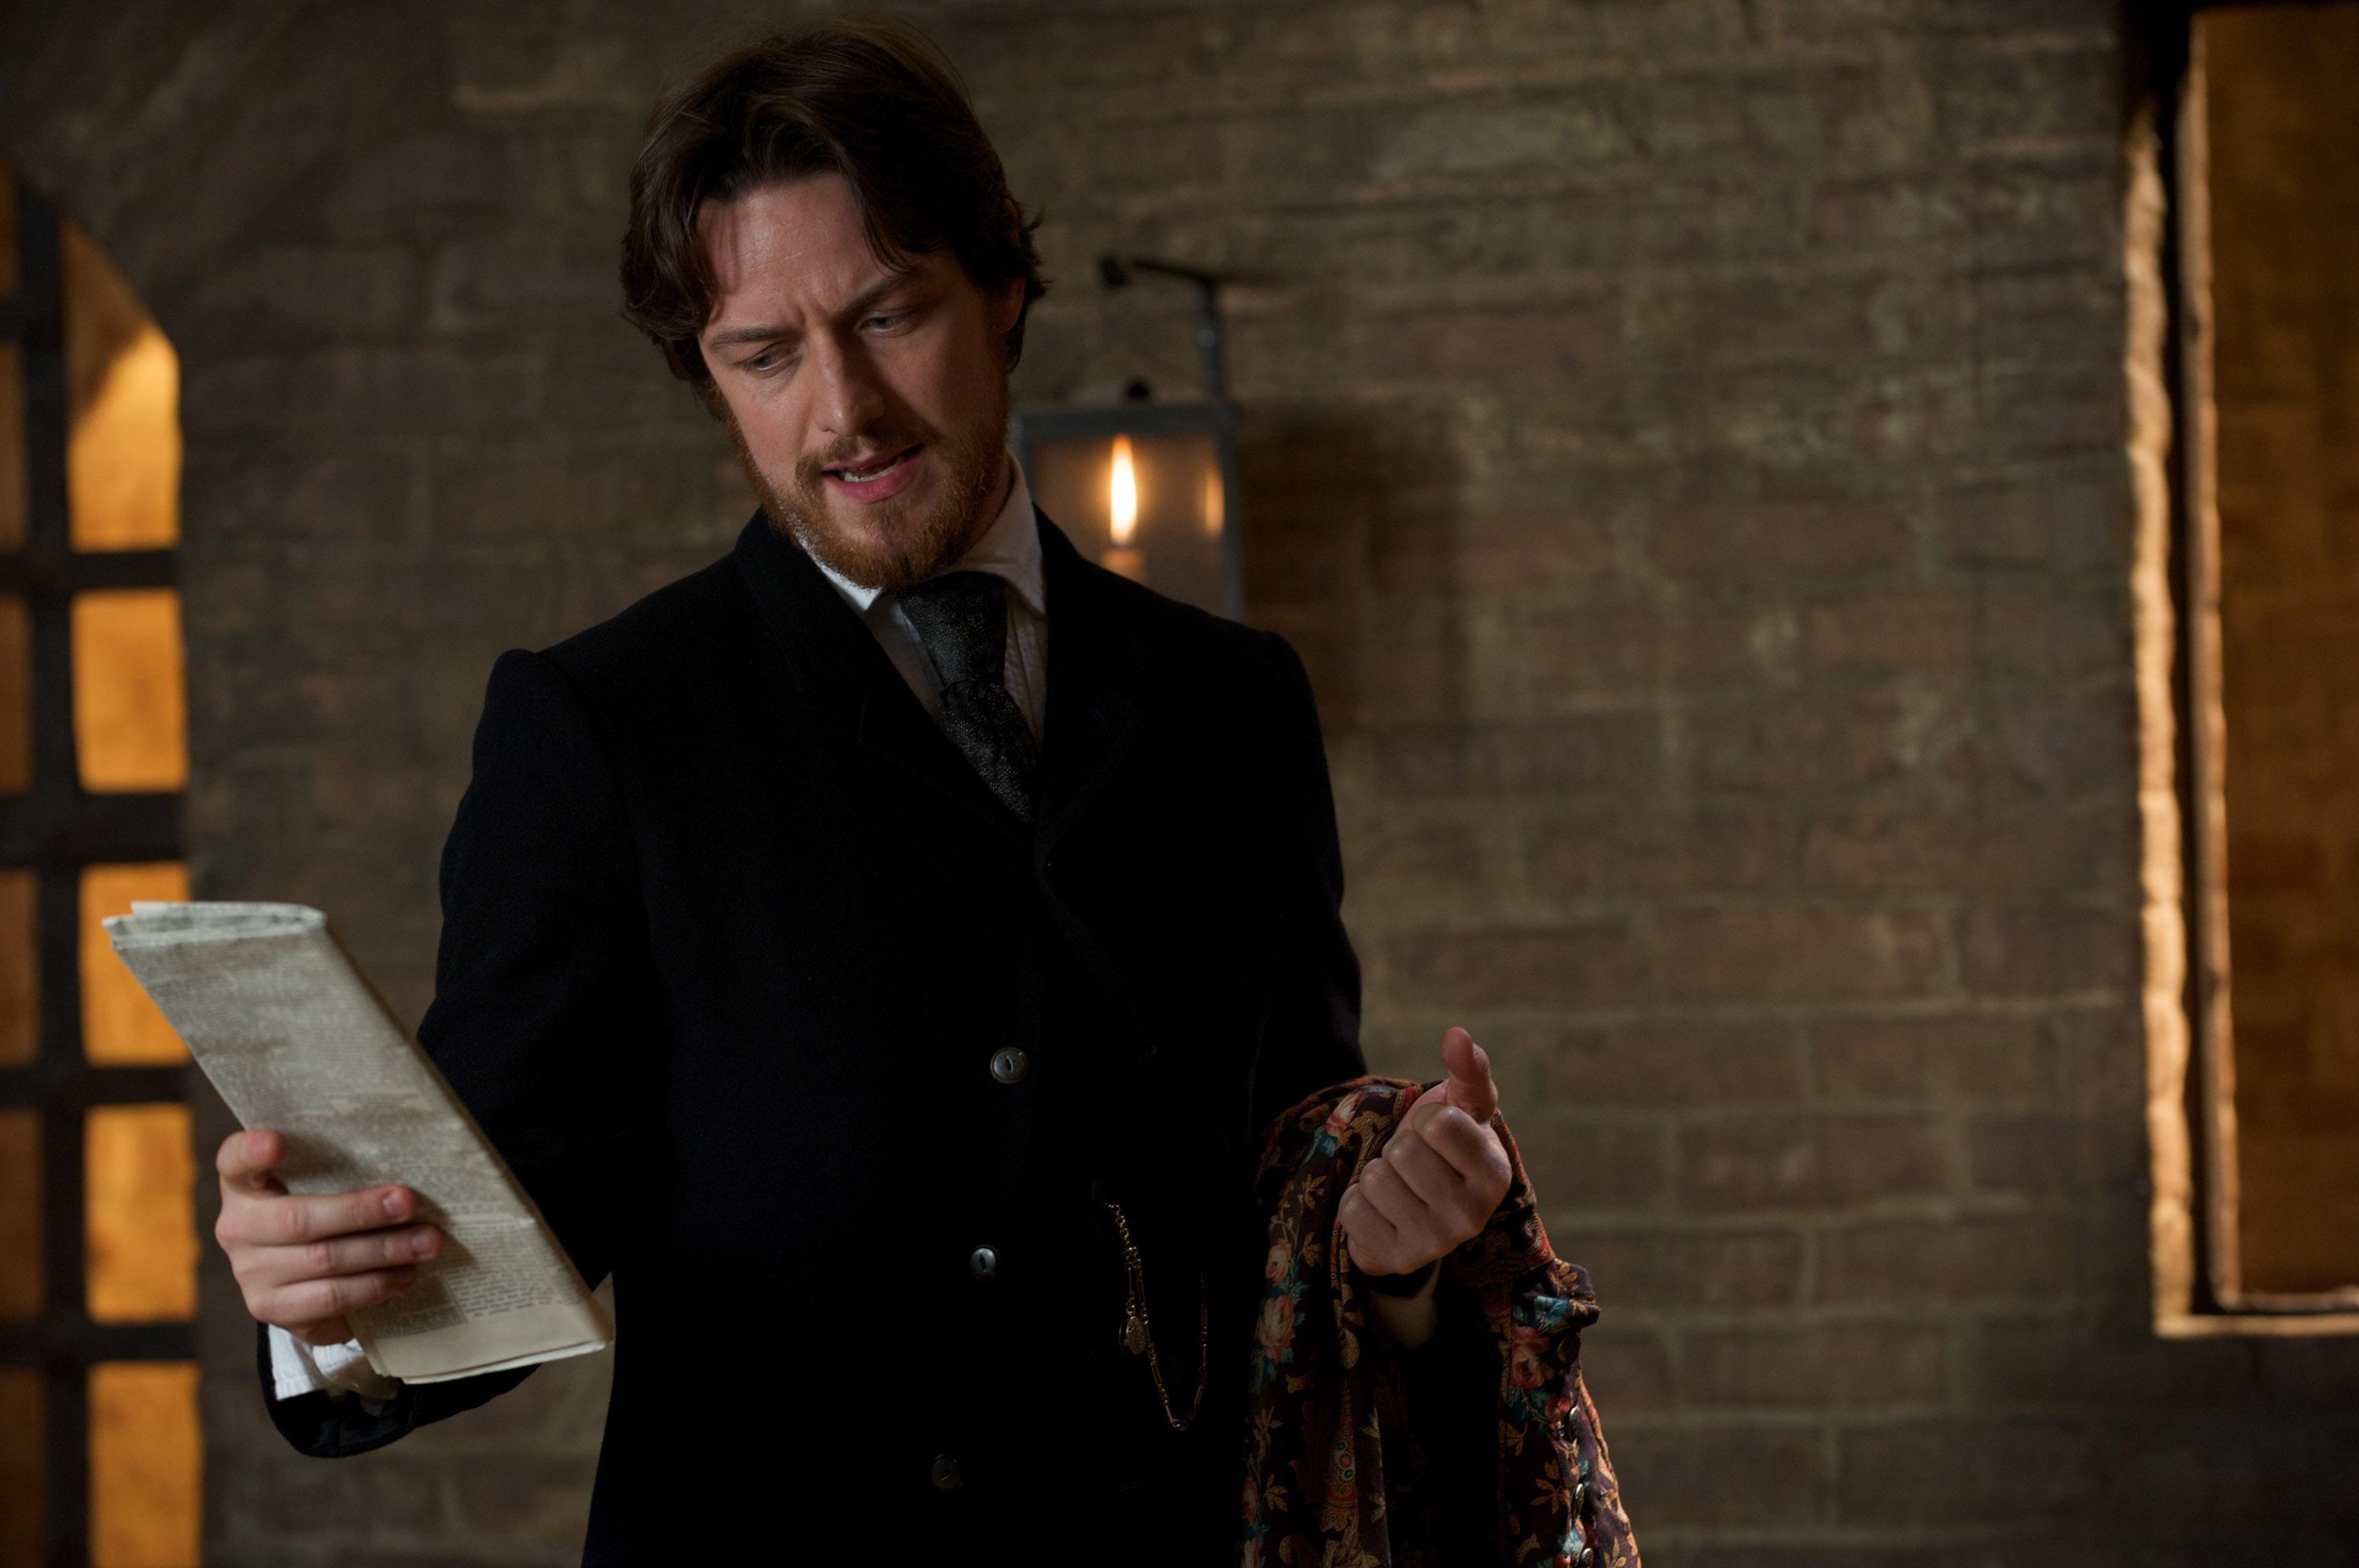 Amazing The Conspirator Pictures & Backgrounds